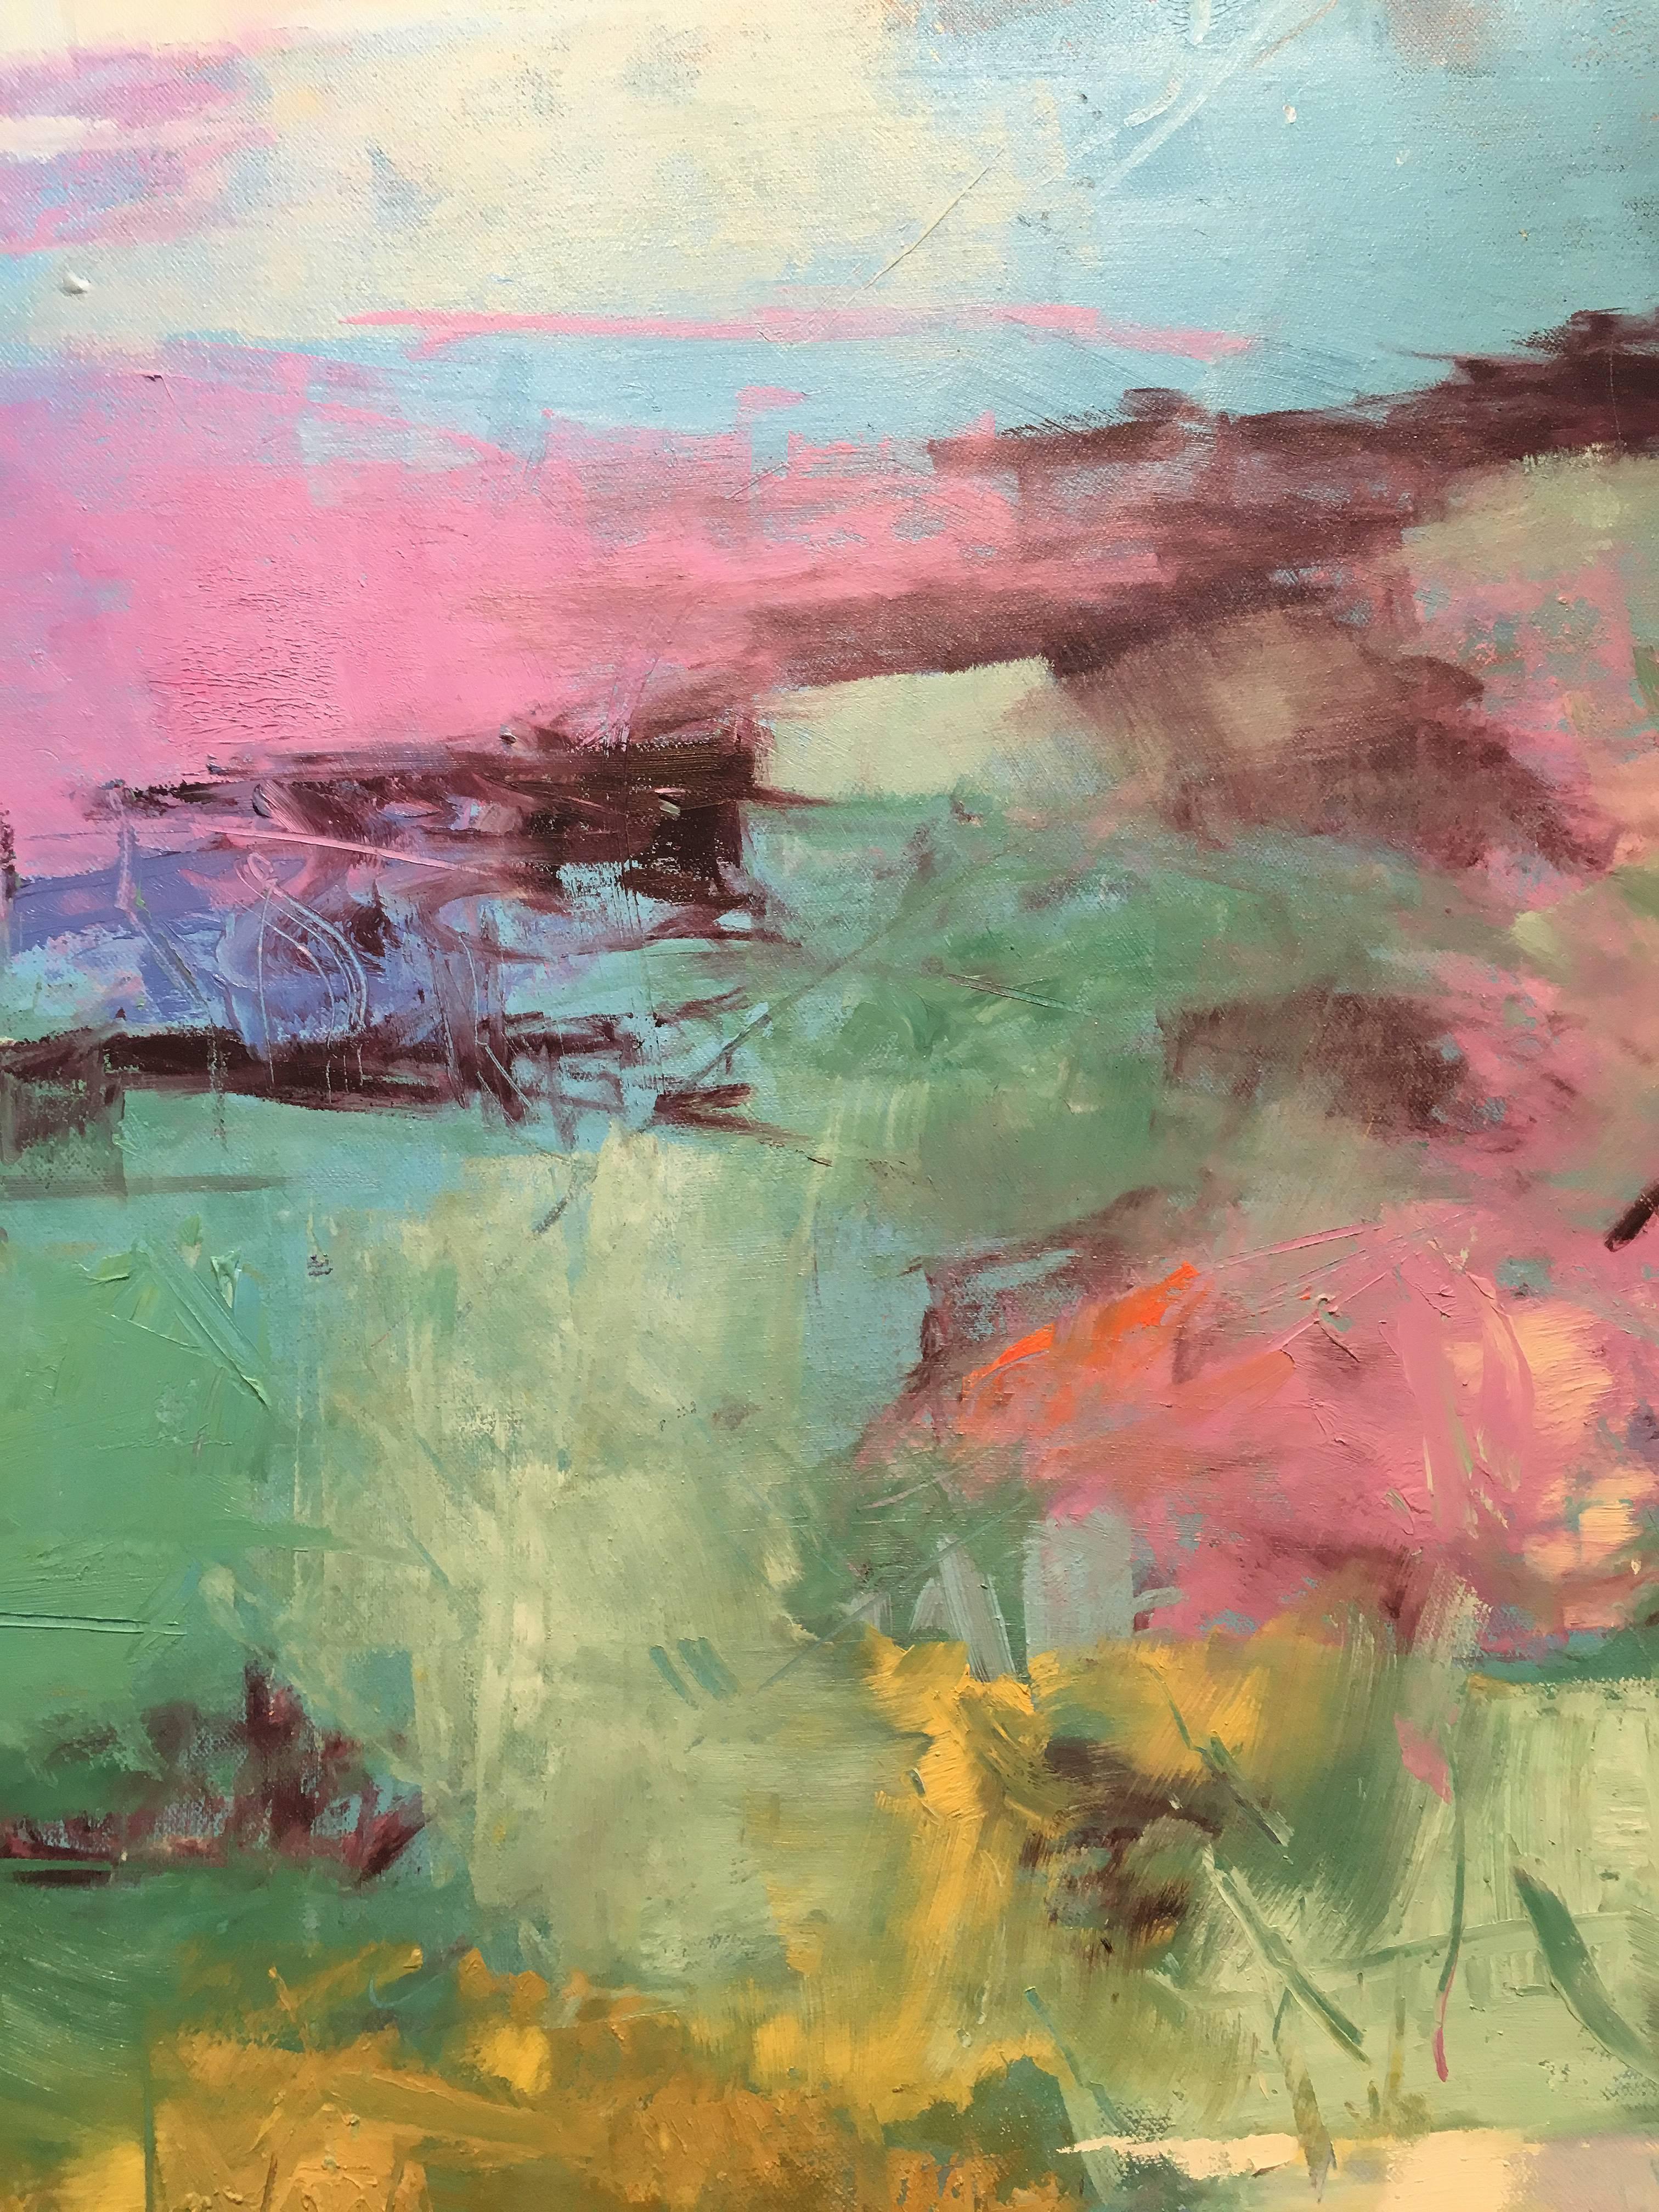 Bursts of lavender, sage and seafoam green, interspersed with rich burgundies, and splashes of pink, orange, and butternut form the abstracted landscape of 